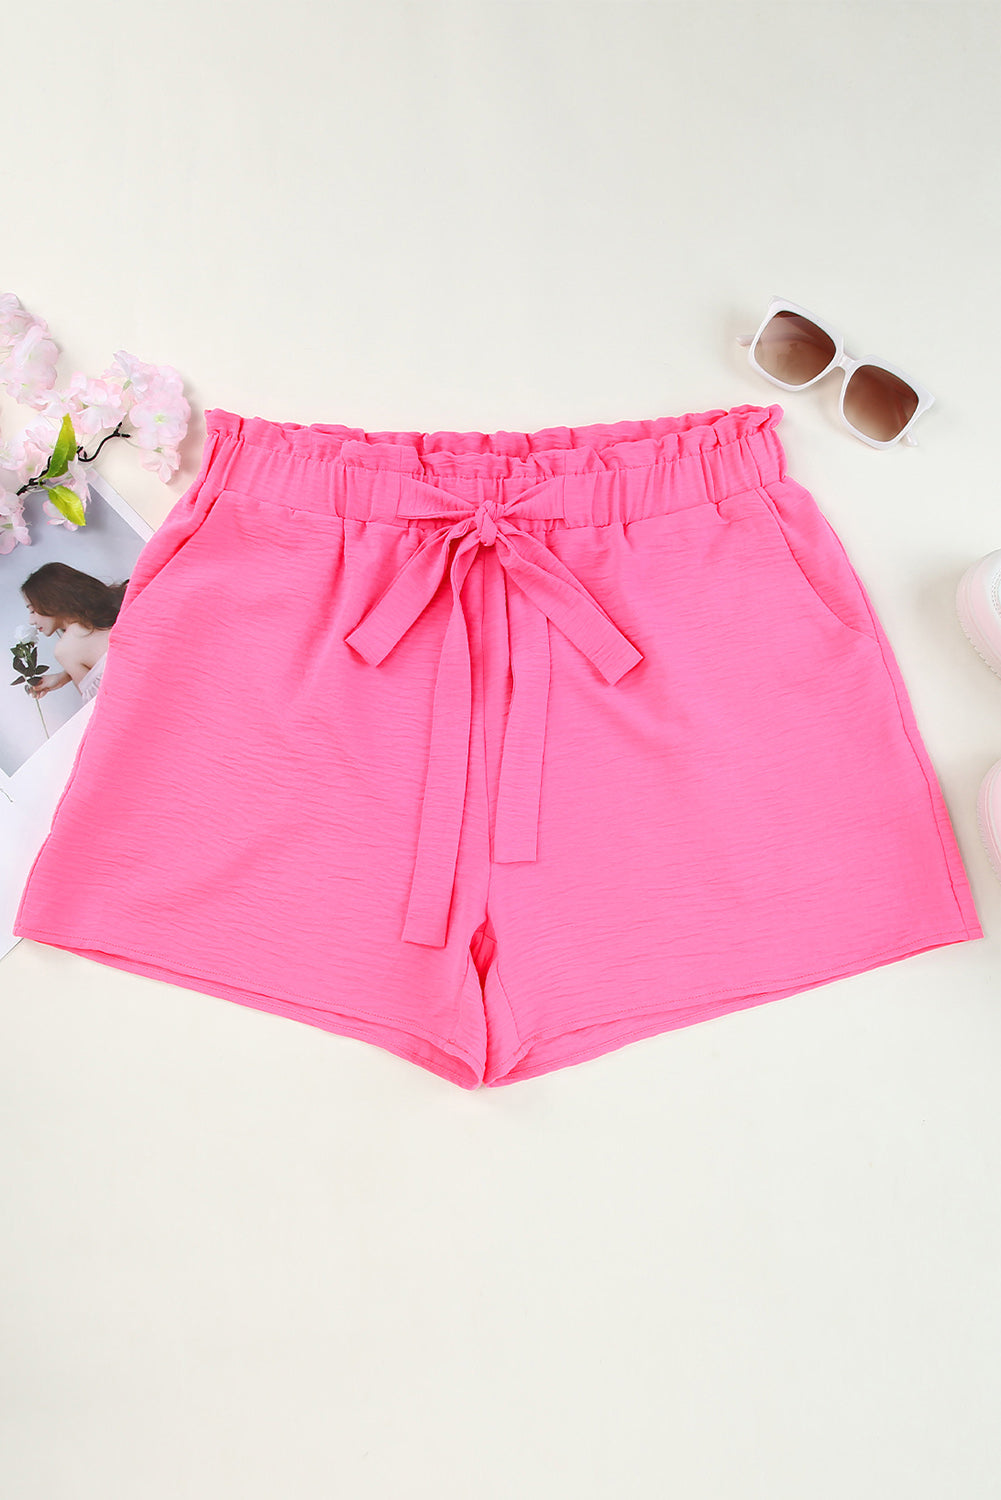 Rose Paperbag High Waist Textured Plus Size Casual Shorts